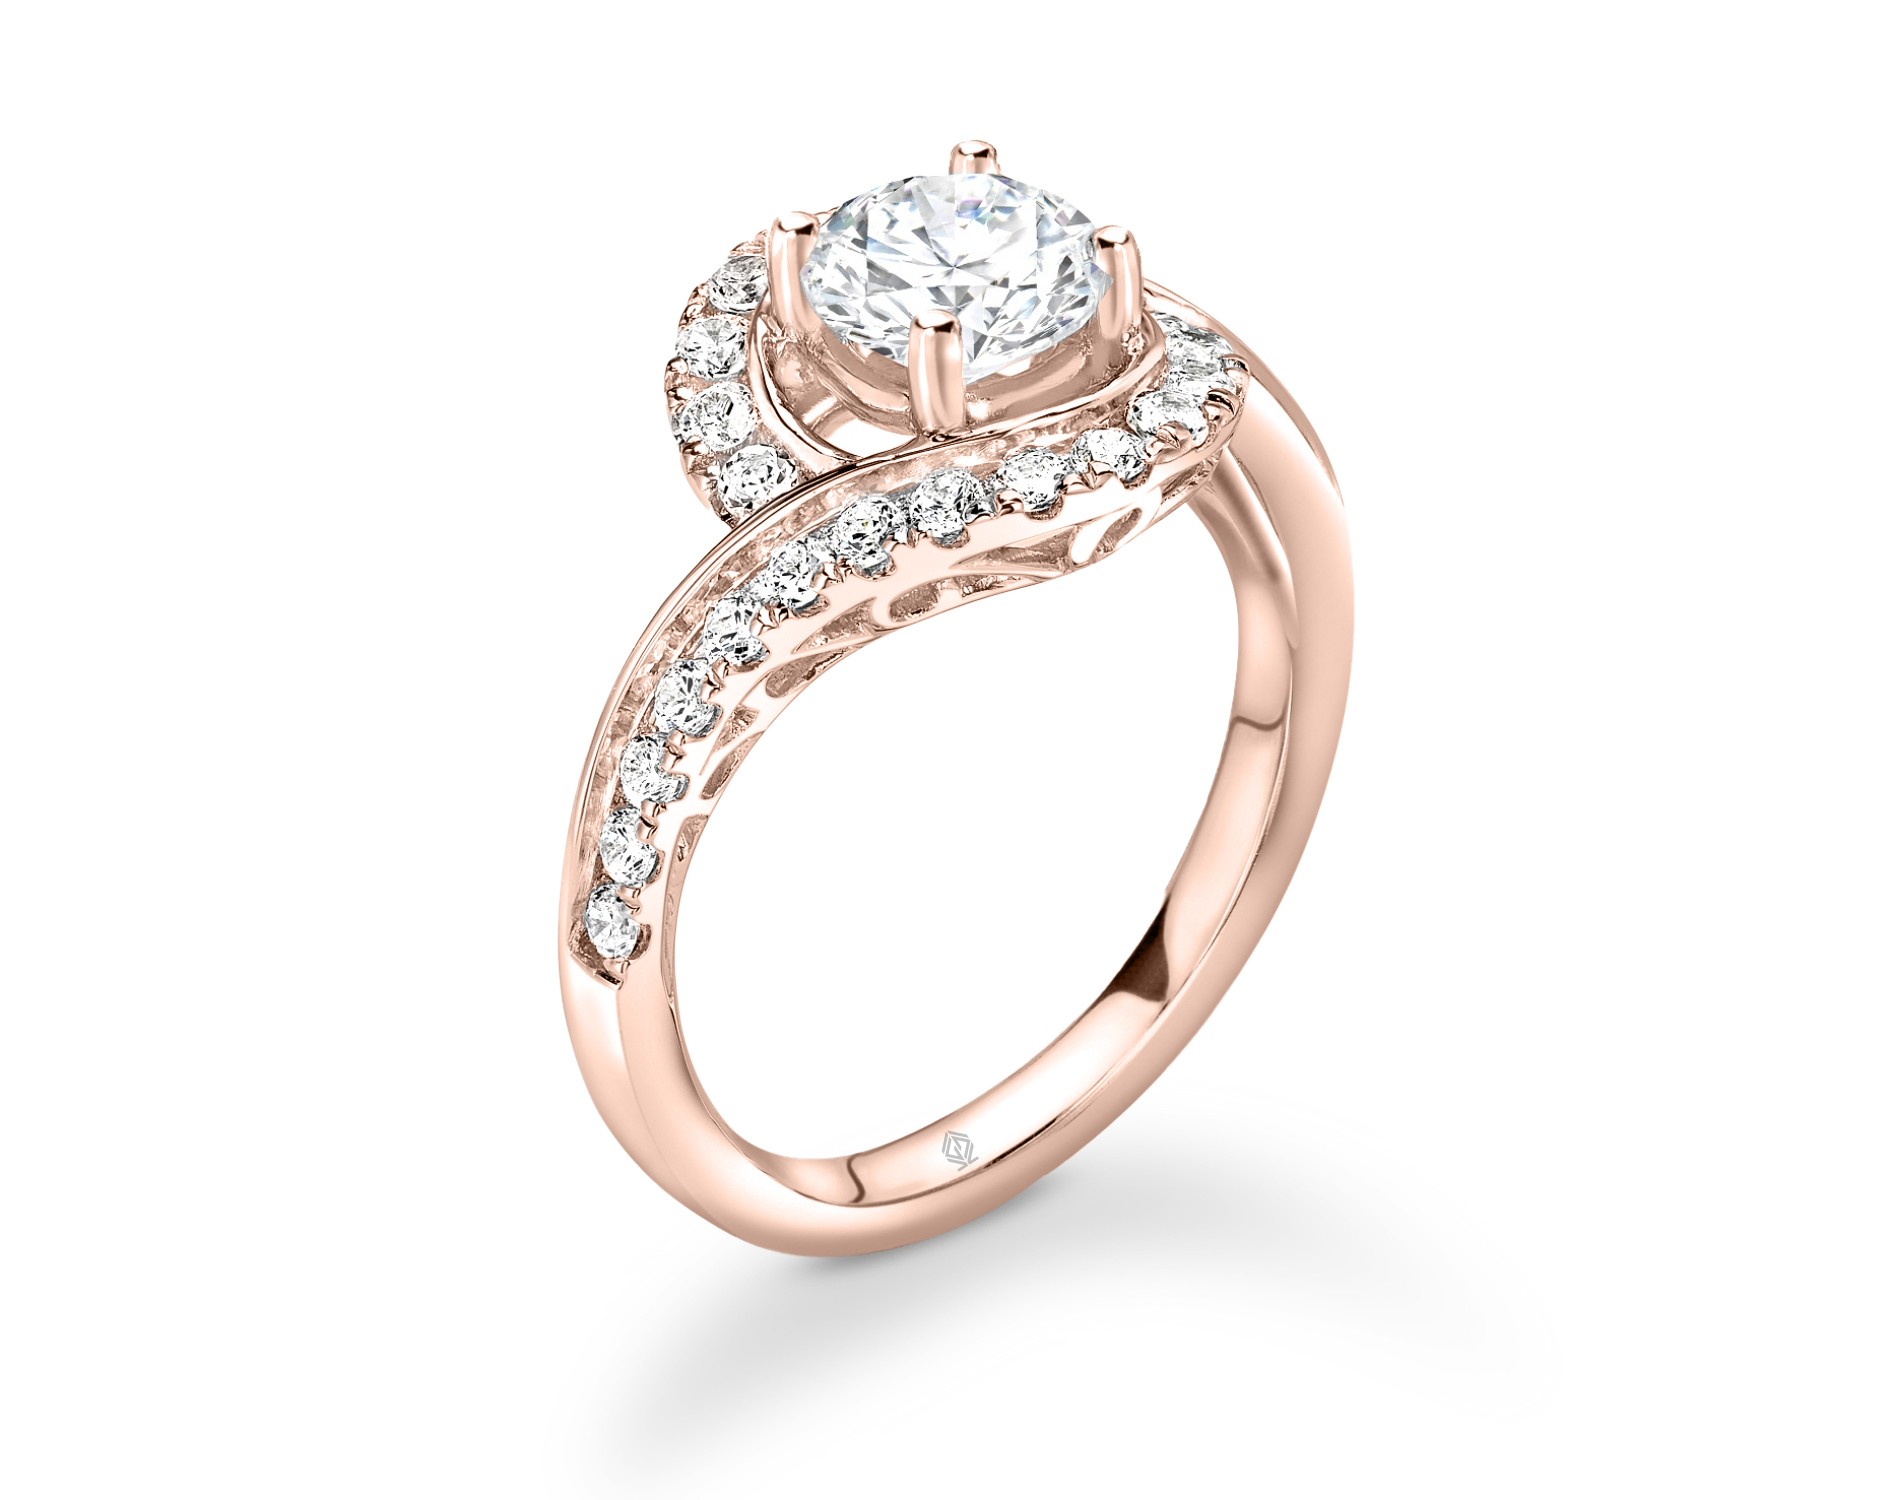 18K ROSE GOLD HALO DIAMOND AND TWISTED SHANK ENGAGEMENT RING IN PAVE SET